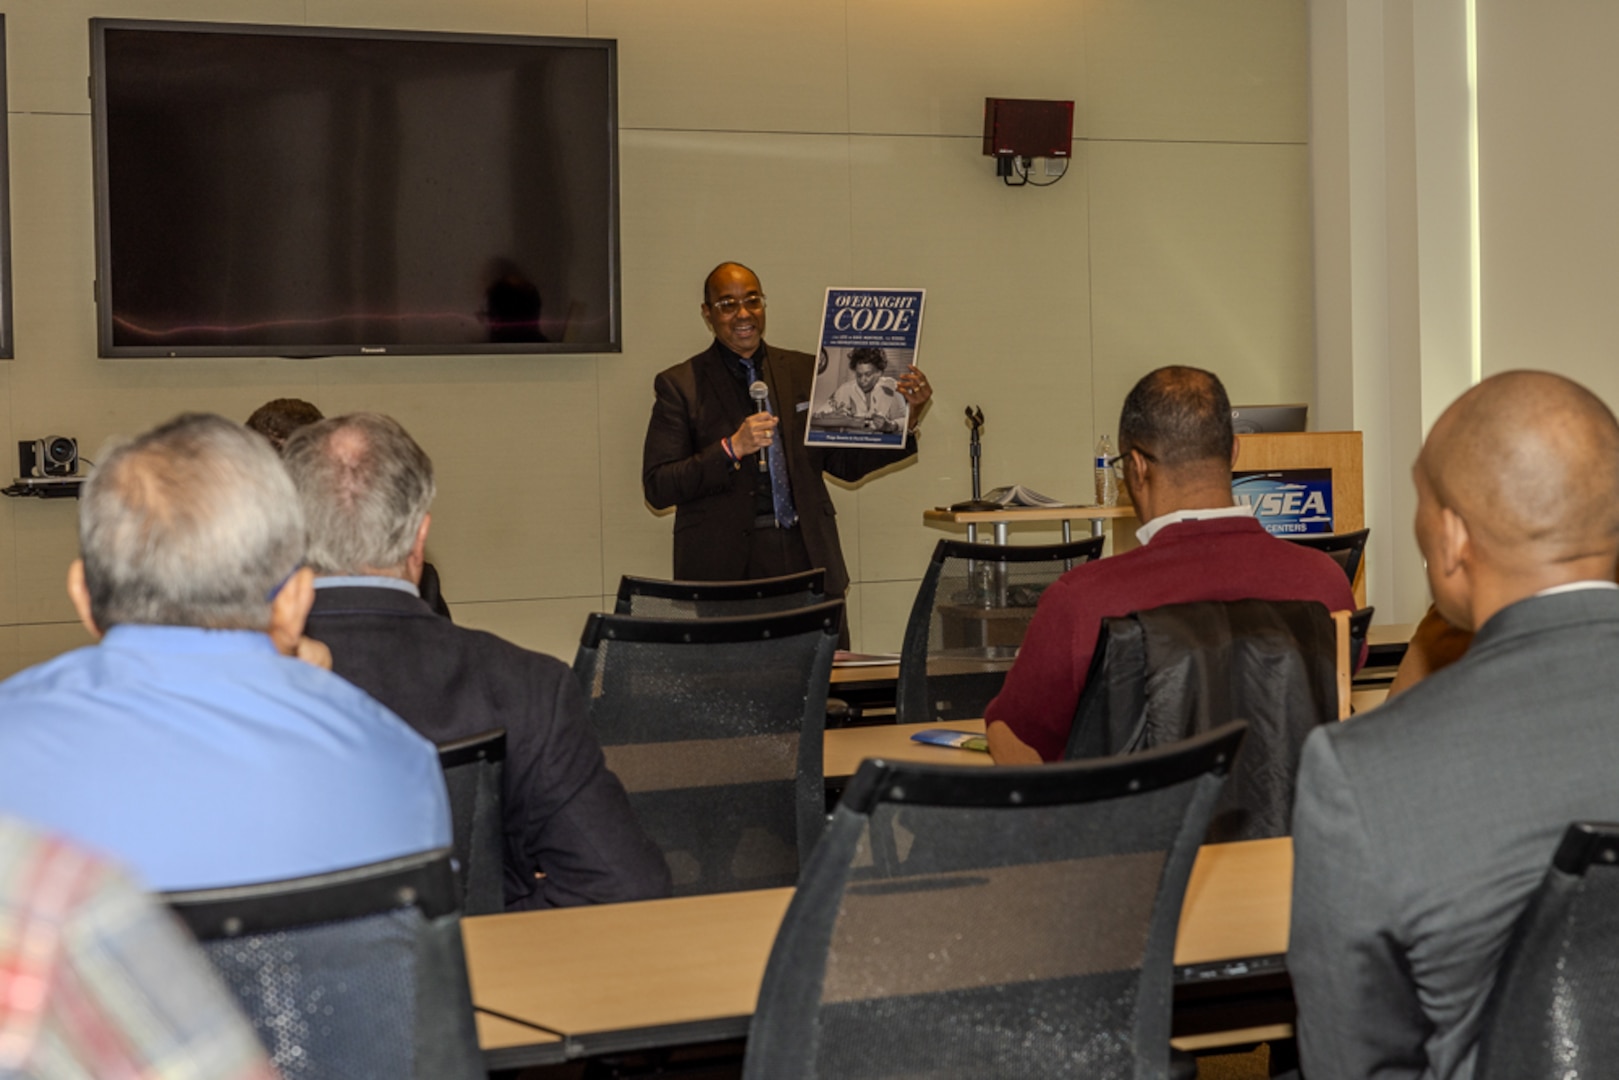 Associate Vice Chancellor for Academic Affairs and Student Success at the University of Arkansas at Little Rock, Dr. David Montague, speaks about his mother’s career, U.S. Navy “hidden figure” Raye Montague.